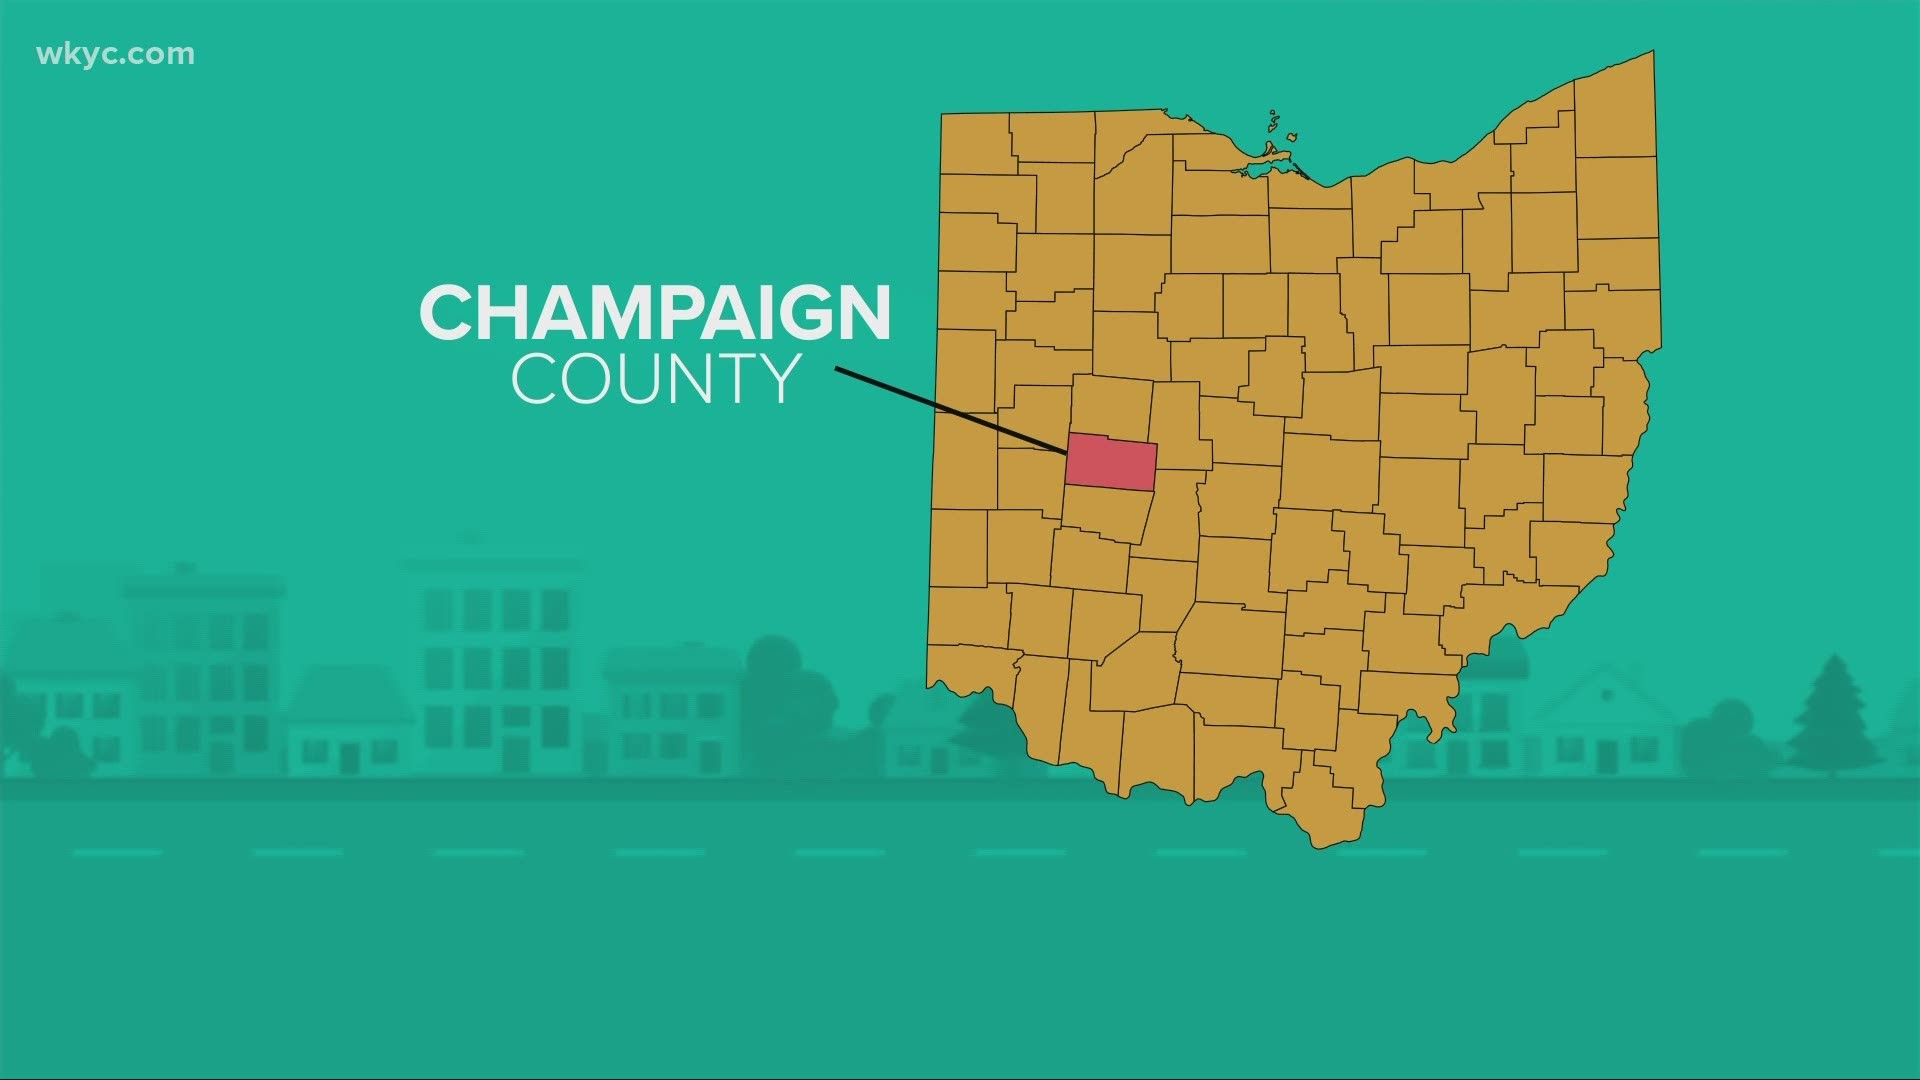 Our series 88 Counties in 88 days continues to Southwest Ohio to Champaign County. The pandemic has hit the community hard, but they're sticking together.